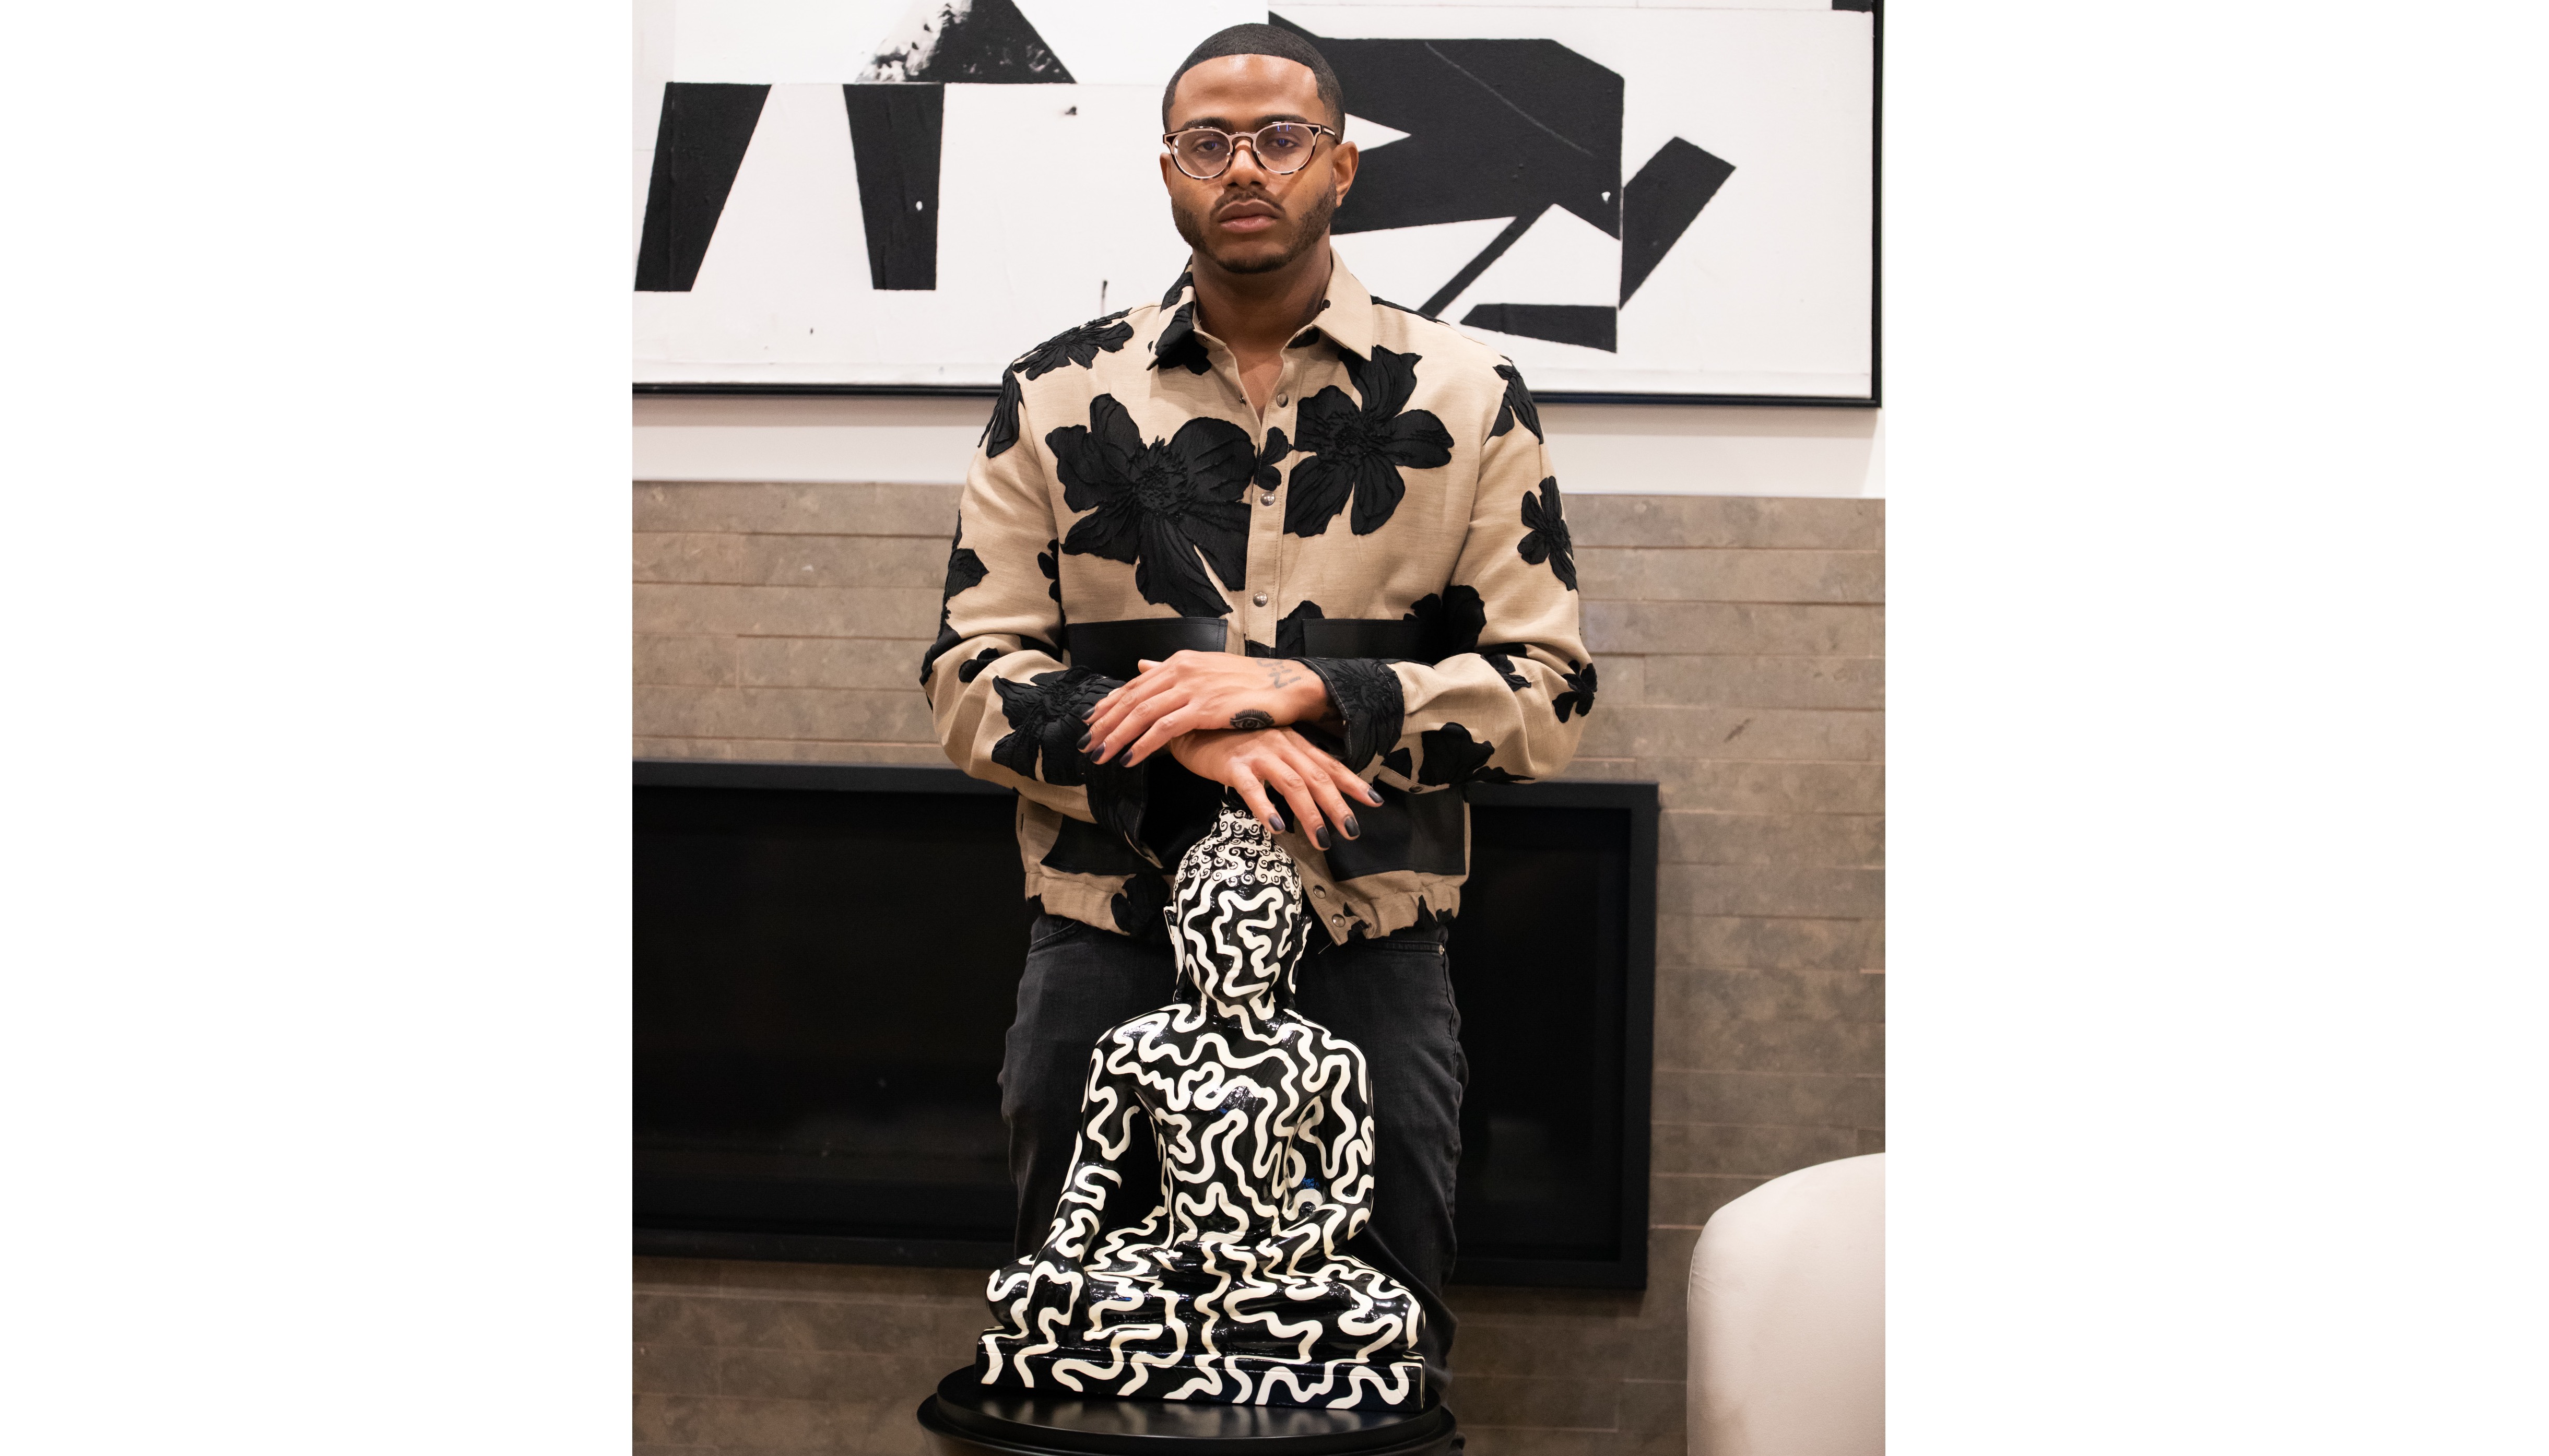 Orly Partners with James Beard Award-Winning Chef Kwame Onwuachi To Launch Limited-Edition Gender-Neutral Nail Collection